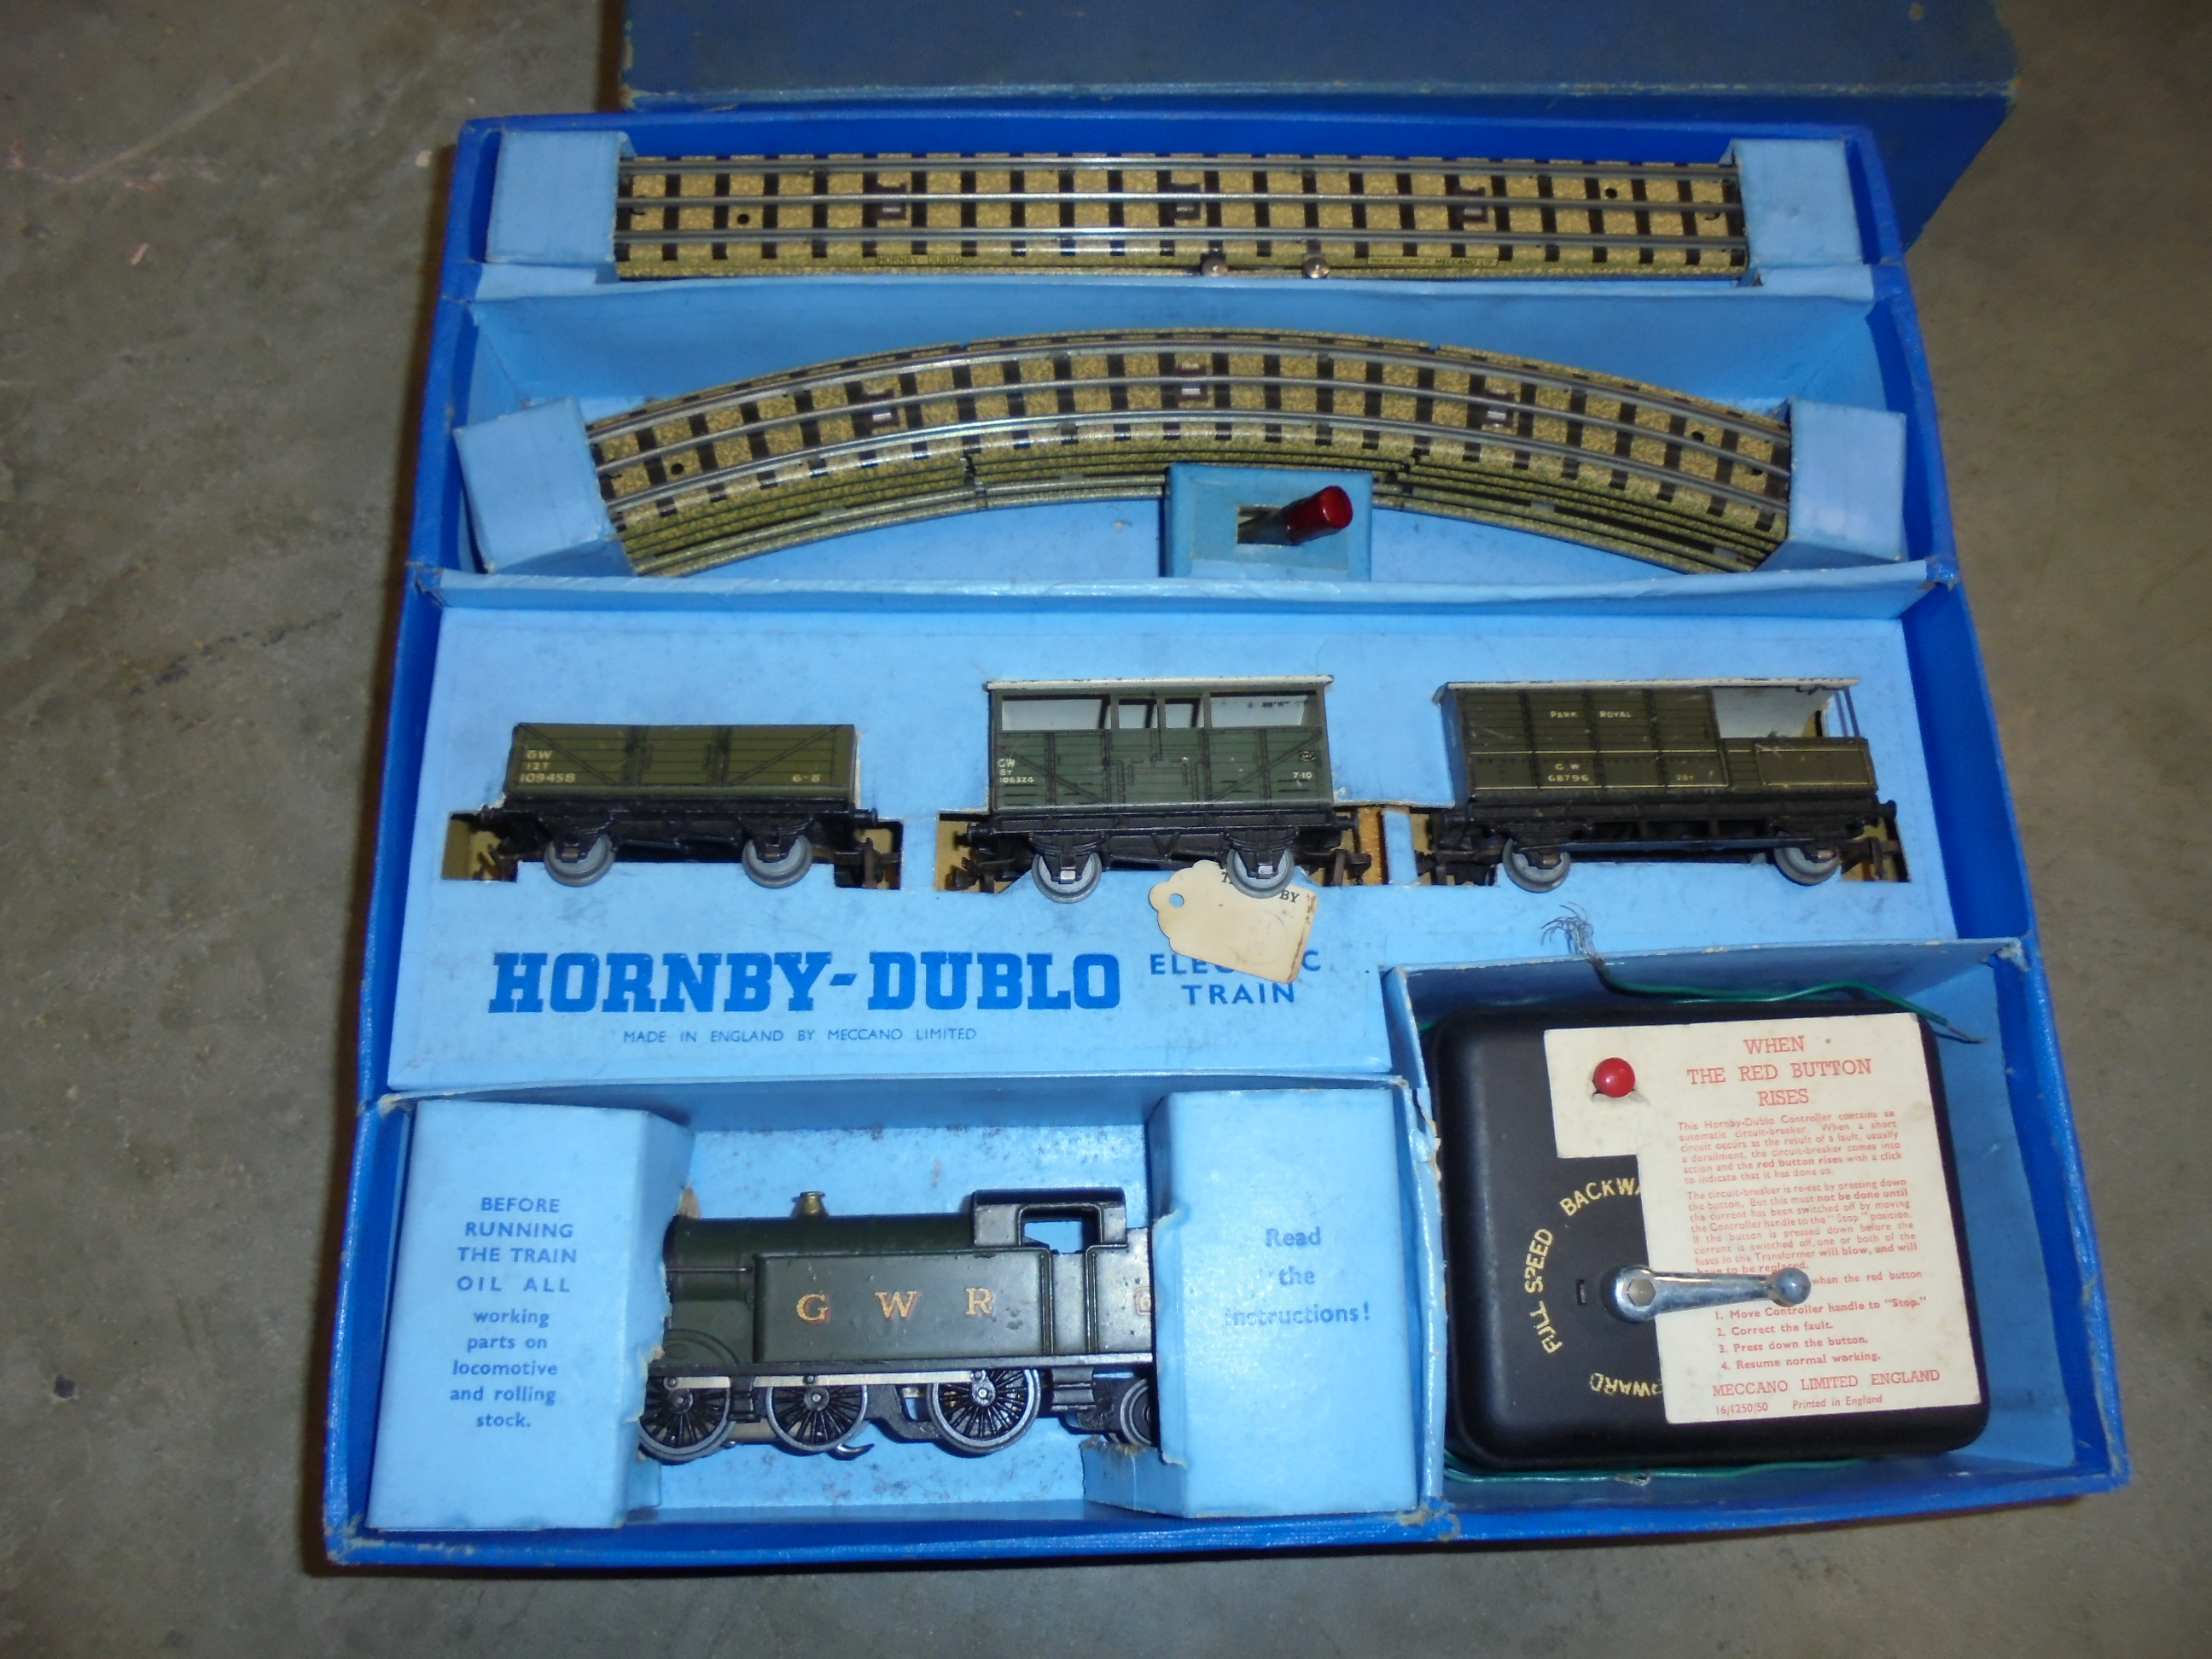 Boxed Hornby Dublo EDG7 Tank Goods Train set with GWR 0-6-2 locomotive, with paperwork, one loose - Image 3 of 3